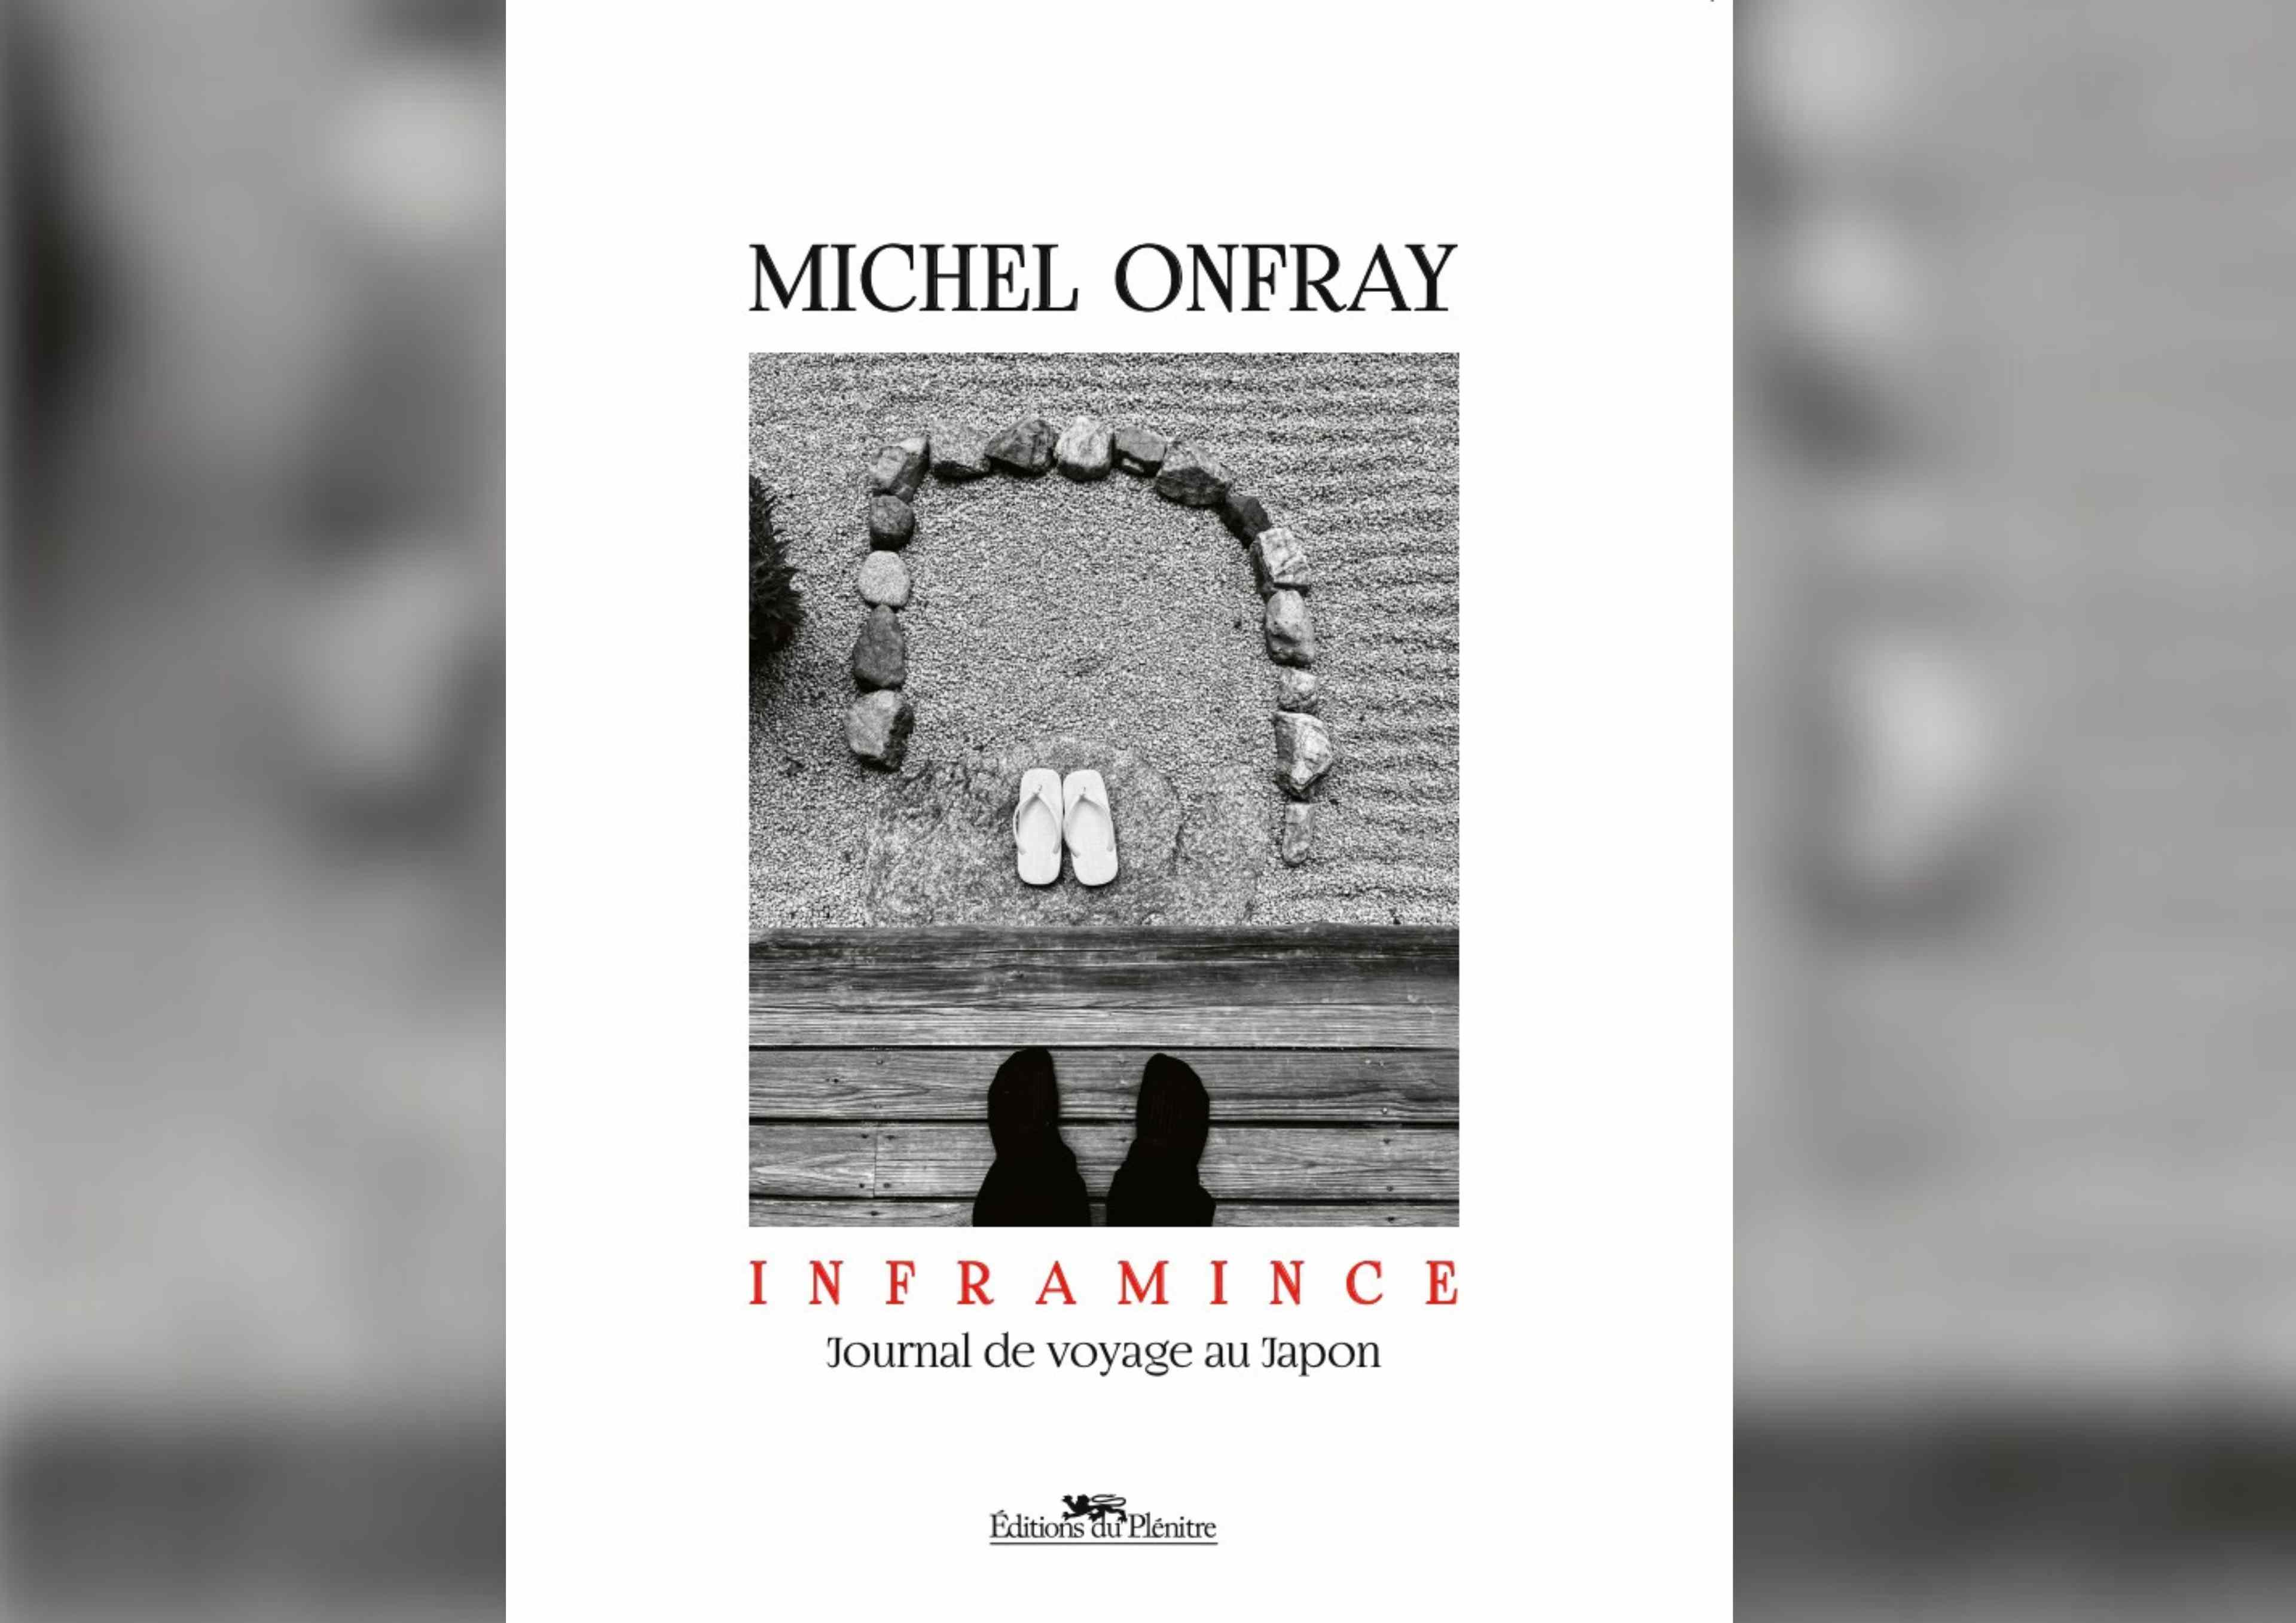 inframince-japon-michel-onfray